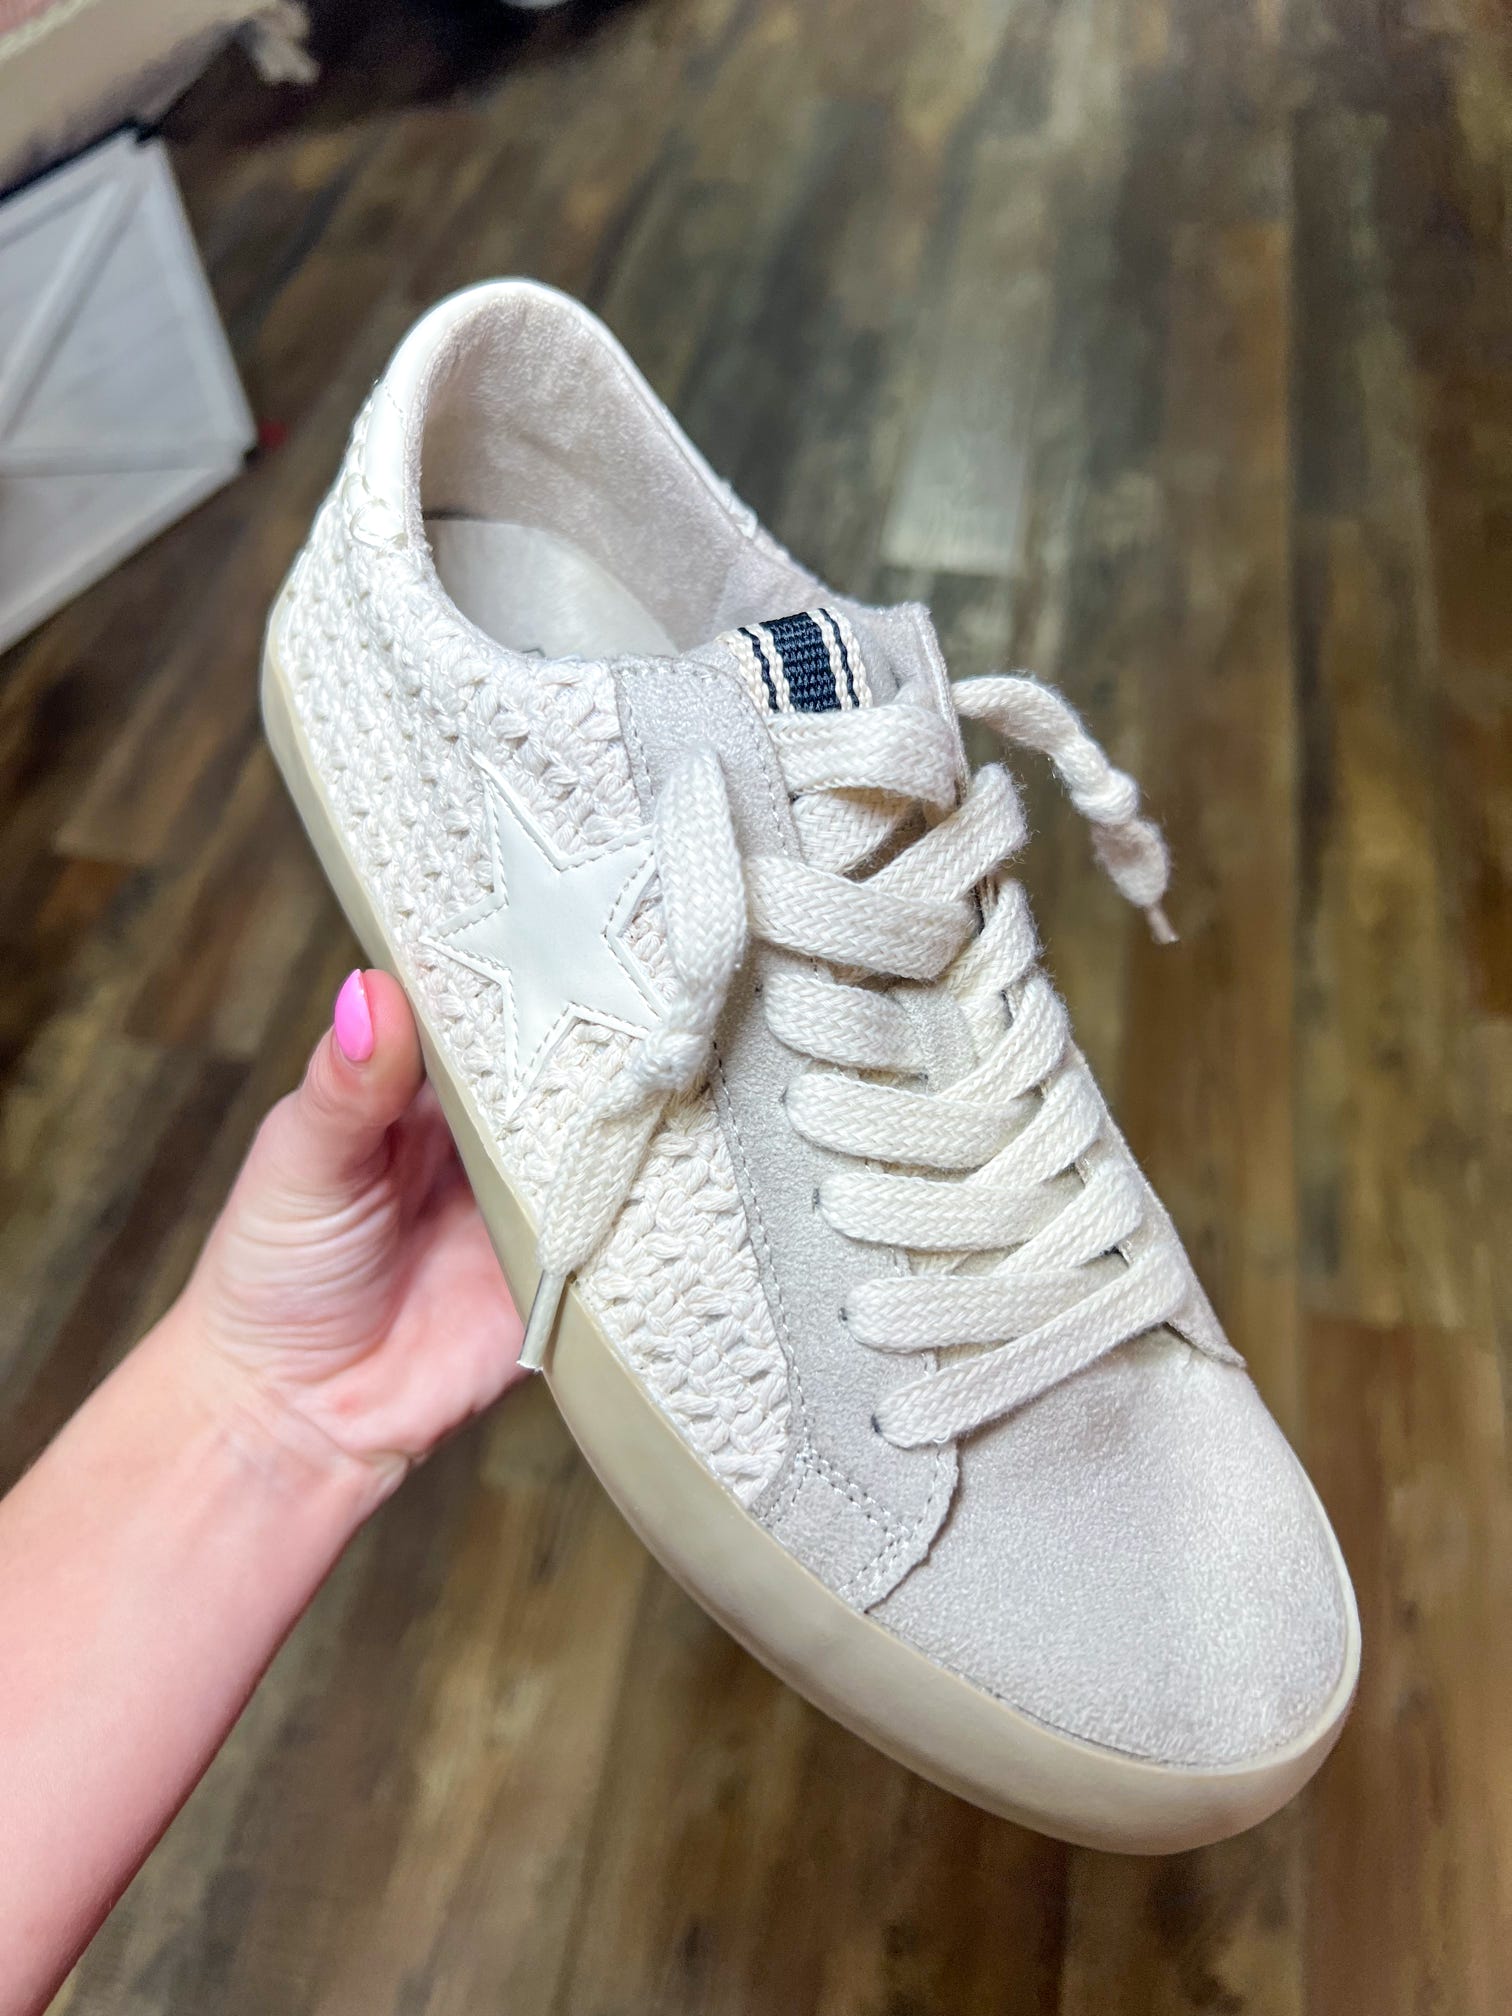 Another photo of our beige ‘distressed’ sneaker made of crochet material and a beige star.